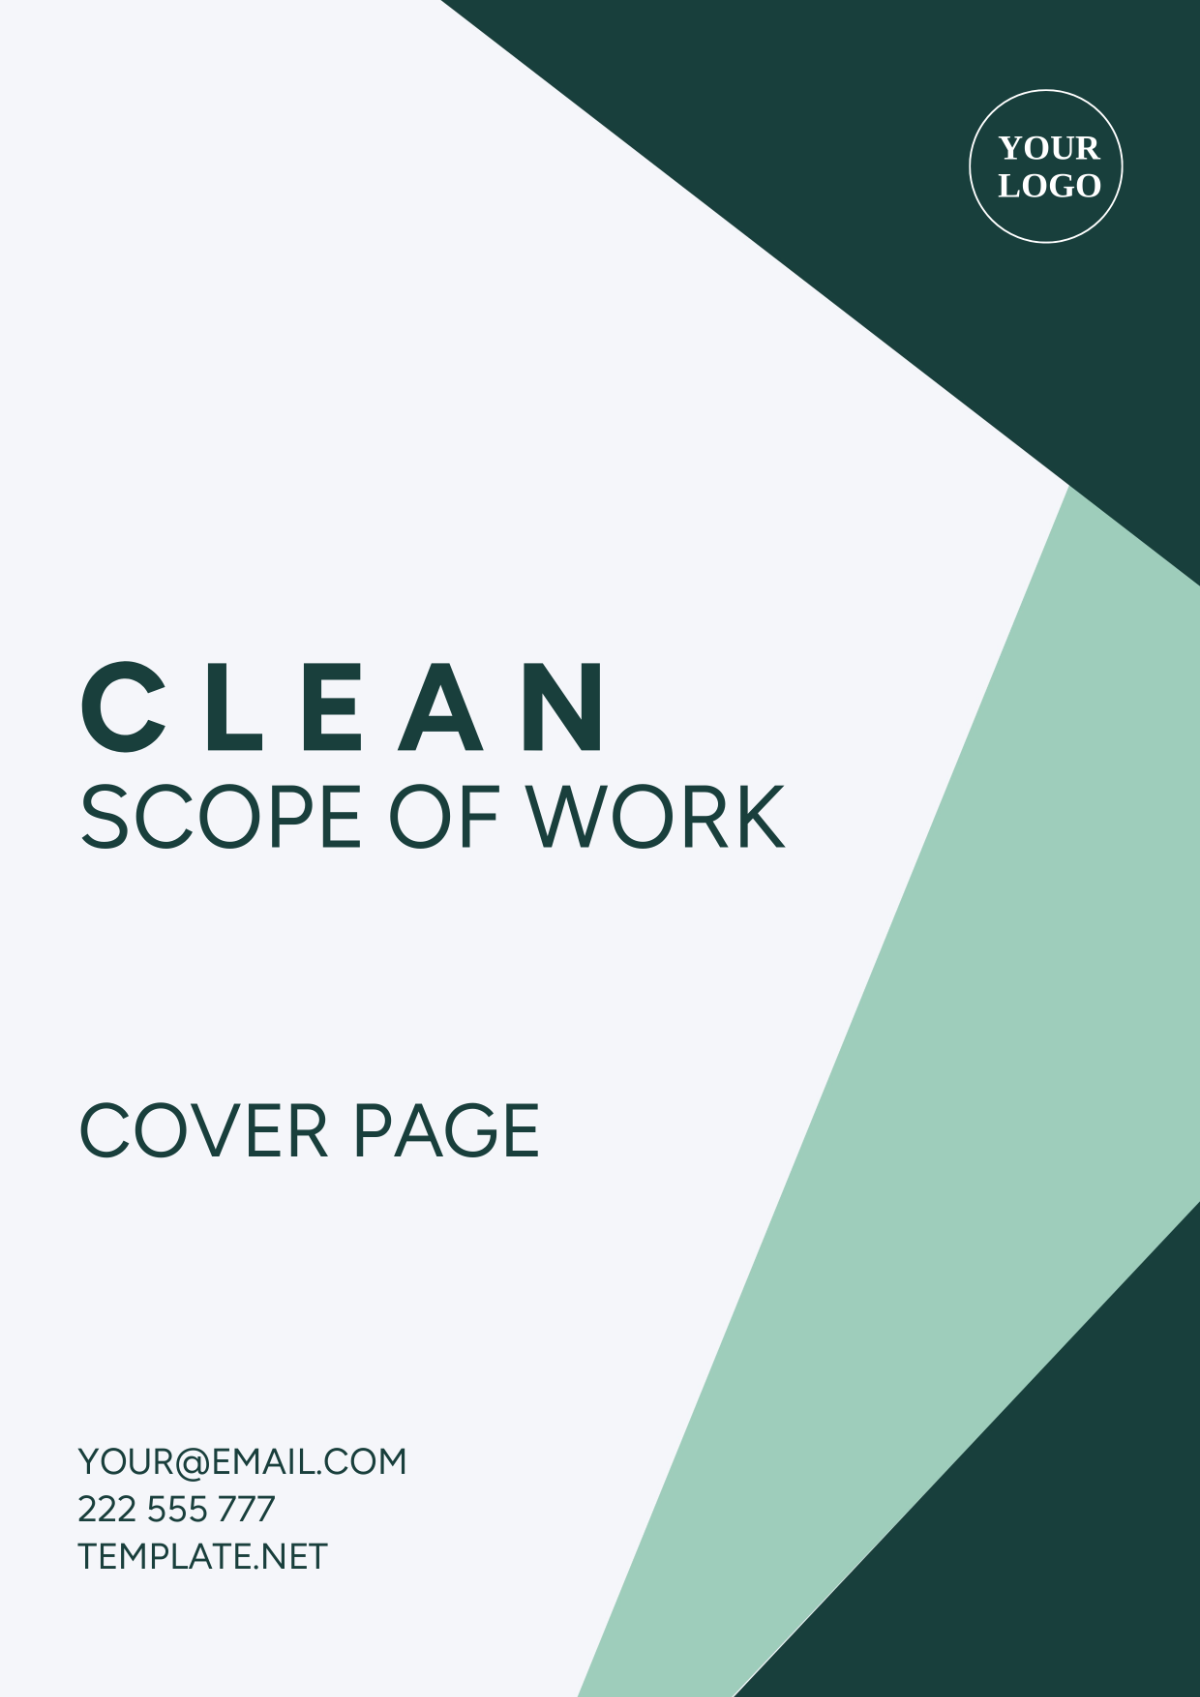 Clean Scope of Work Cover Page